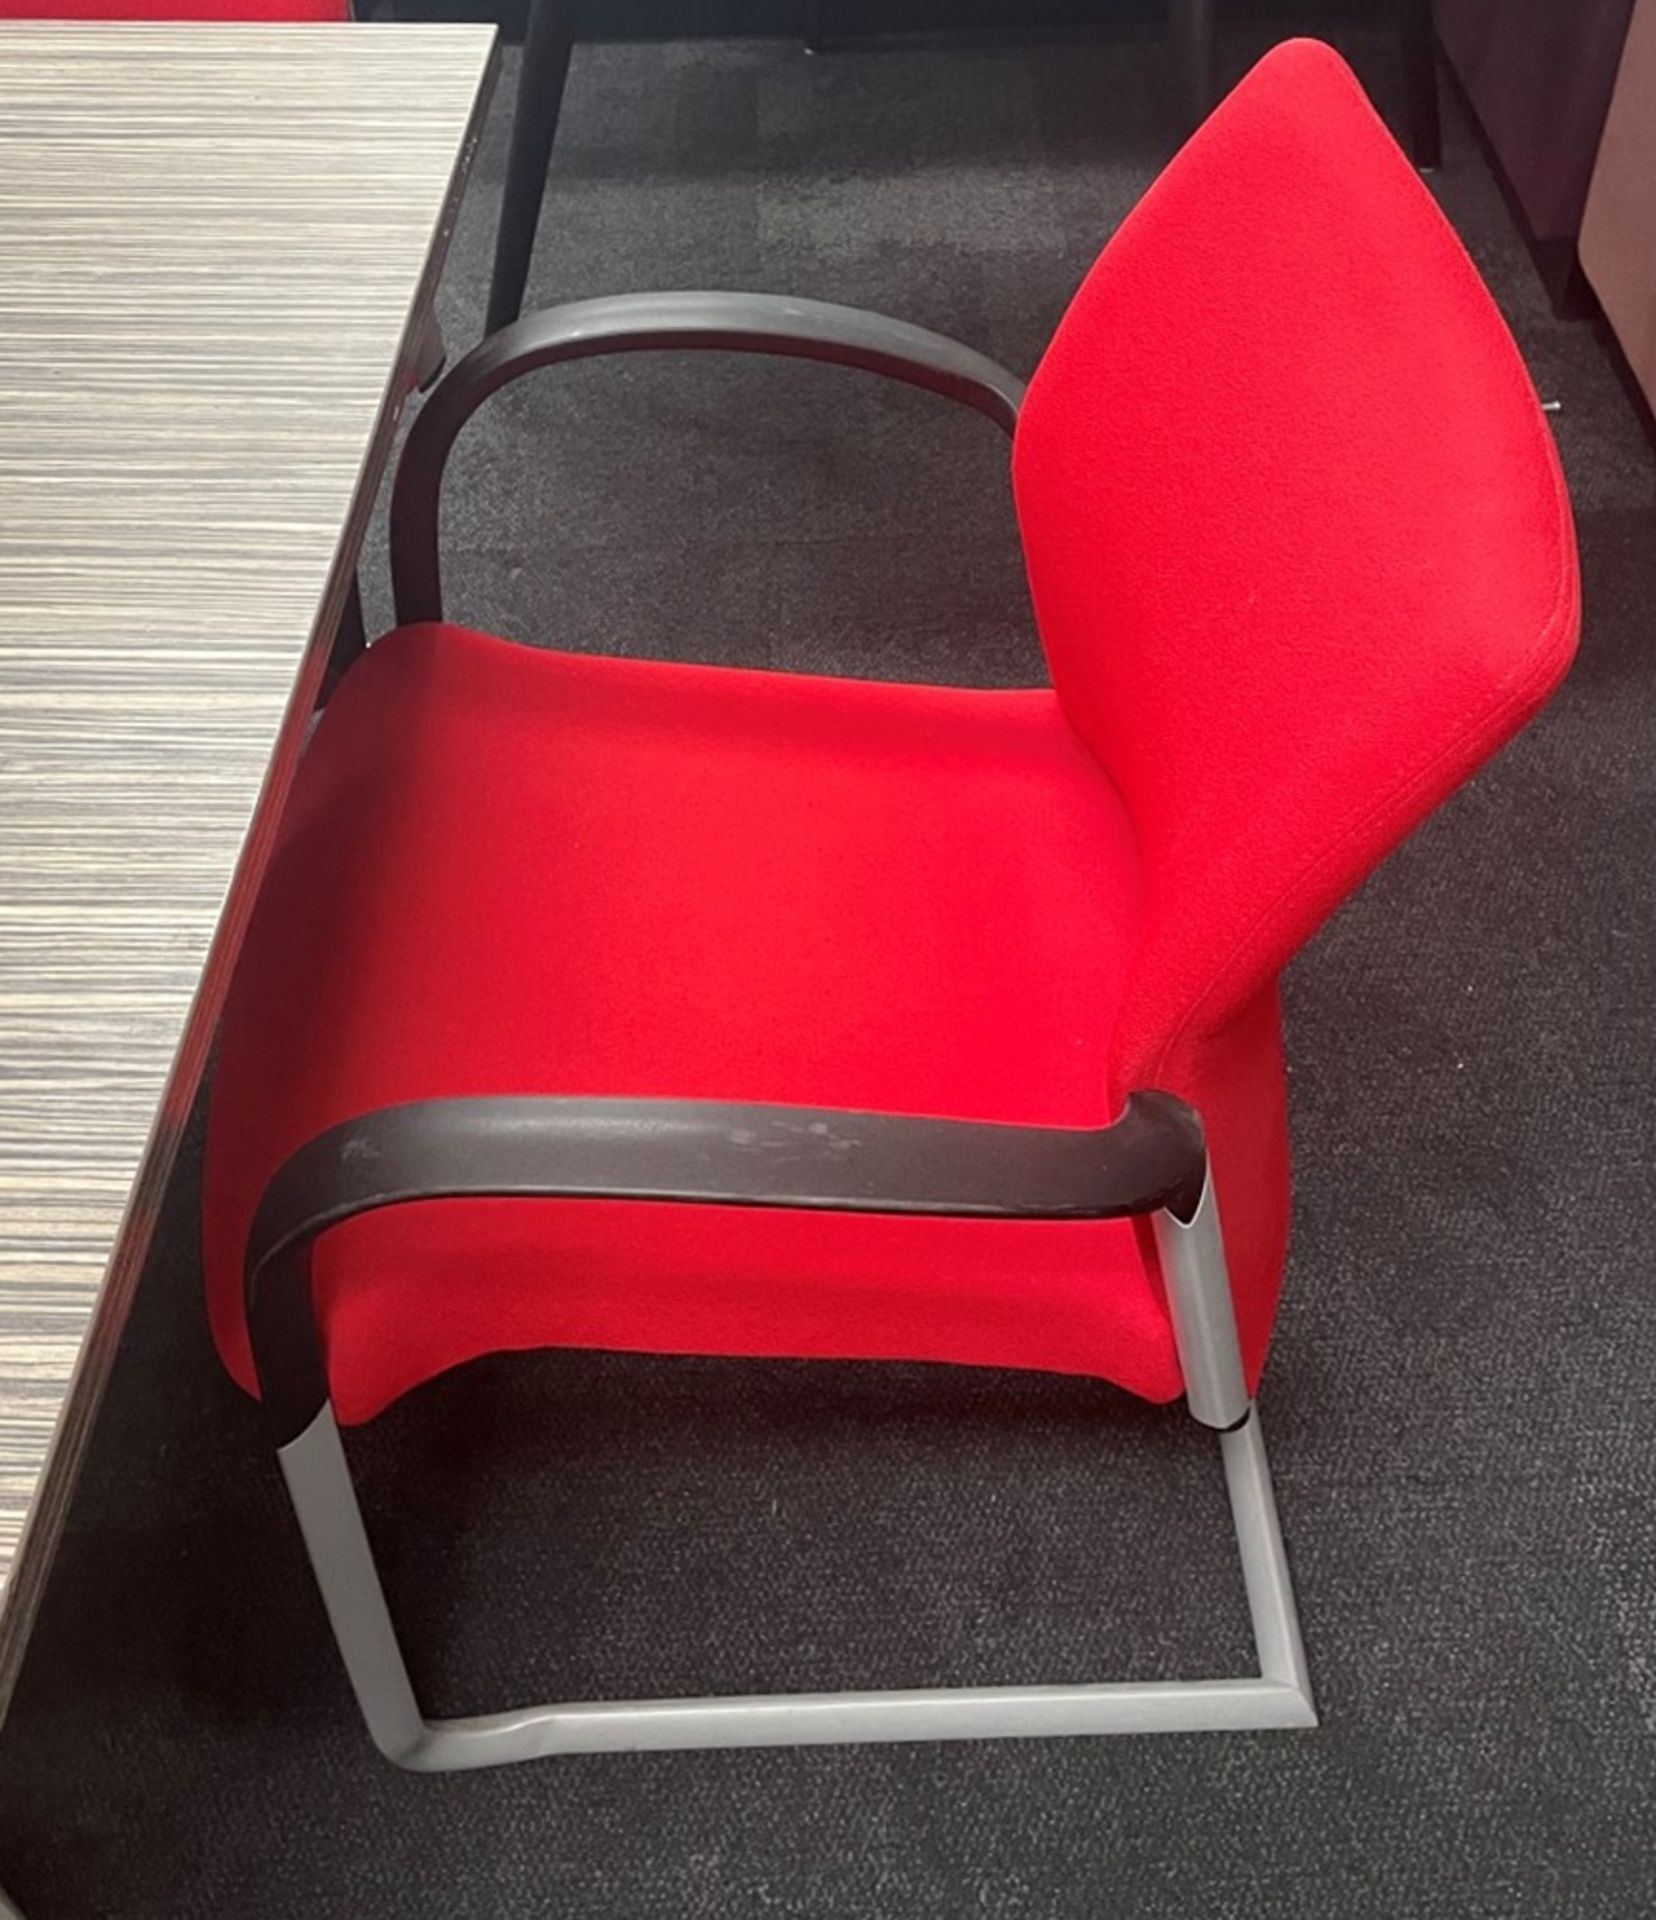 1 x 2-Metre Long Boardroom Table With 8 x Red Senator Chairs - To Be Removed From An Executive - Image 7 of 18